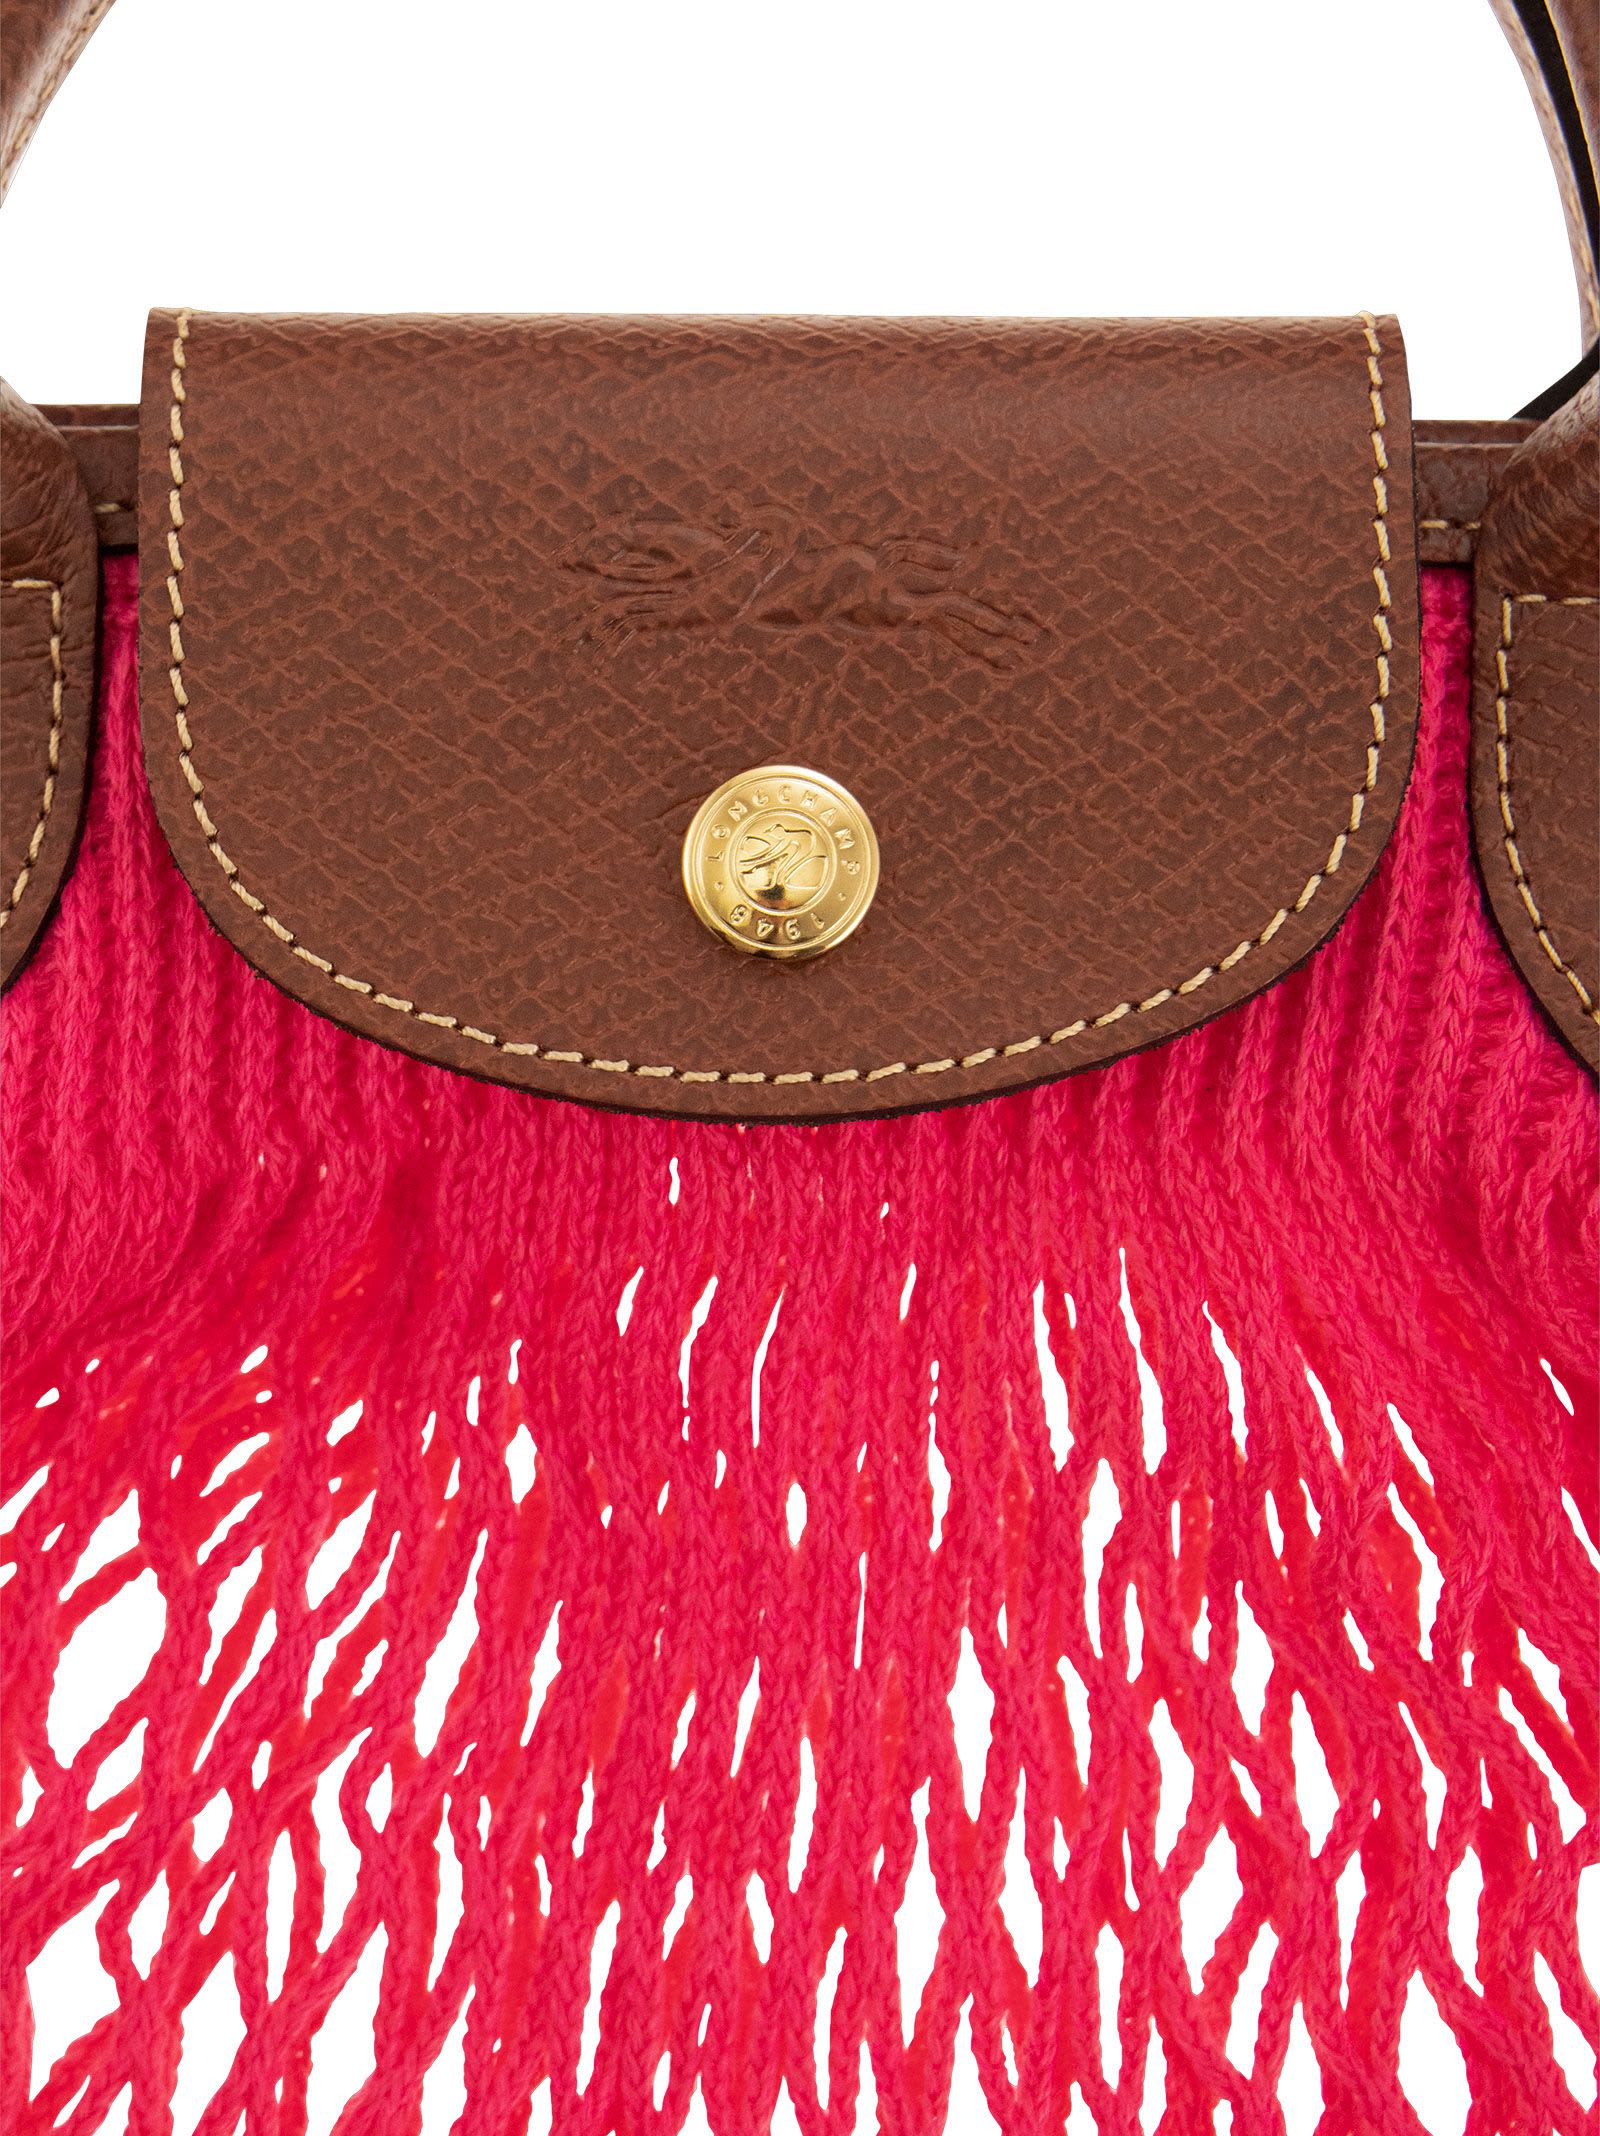 Longchamp Le Pliage Filet - Top Handle Bag in Red